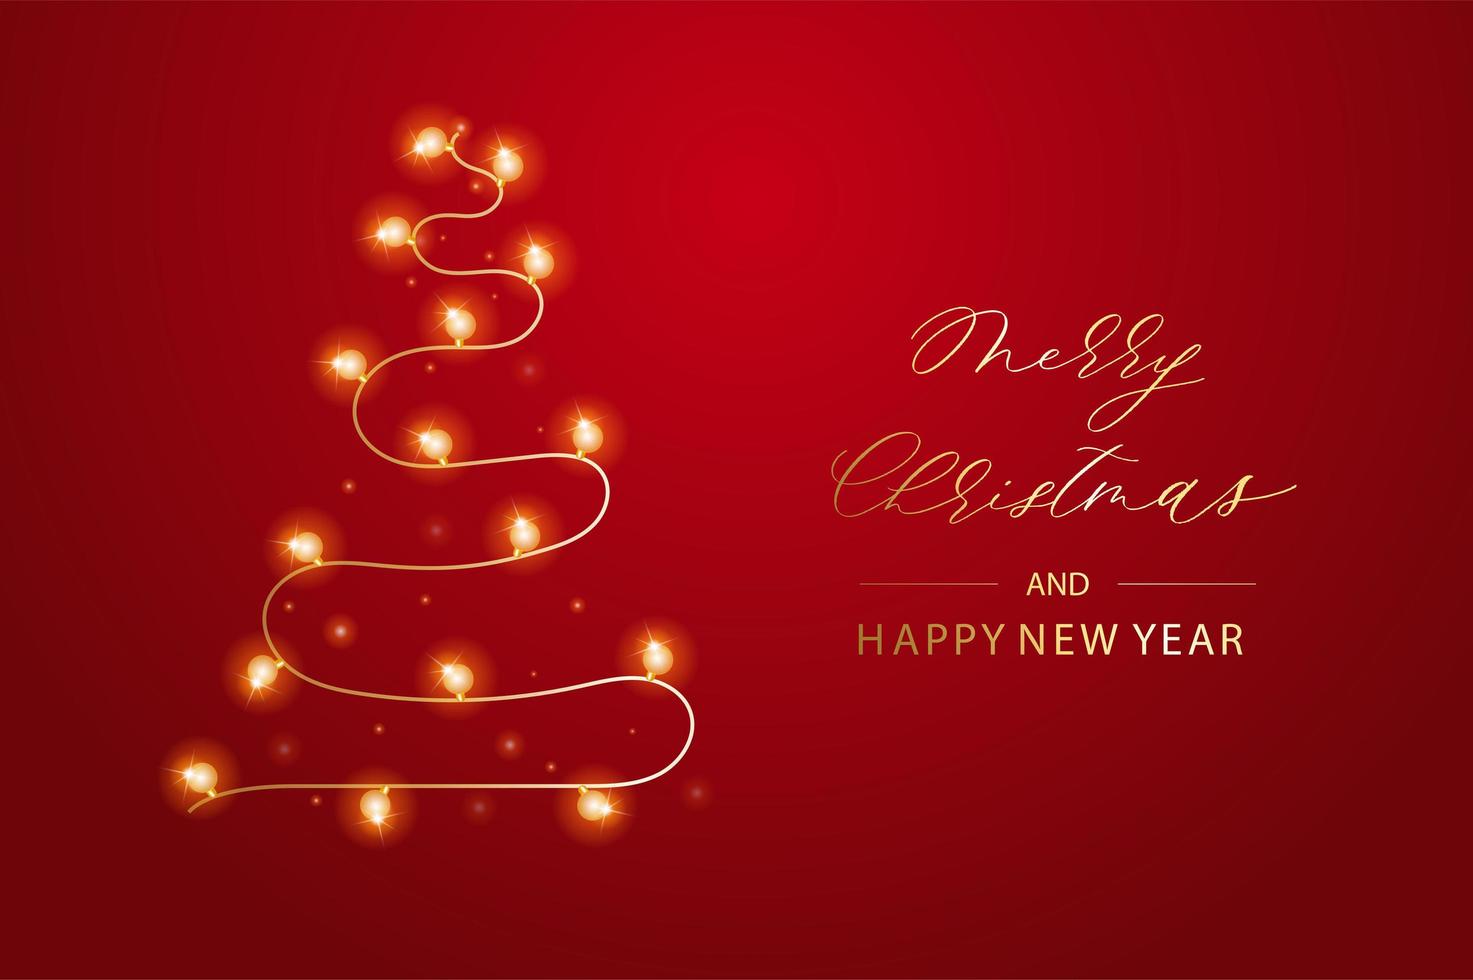 Holiday background with abstract christmas tree, lights and garlands. Merry Christmas card illustration on red background. vector